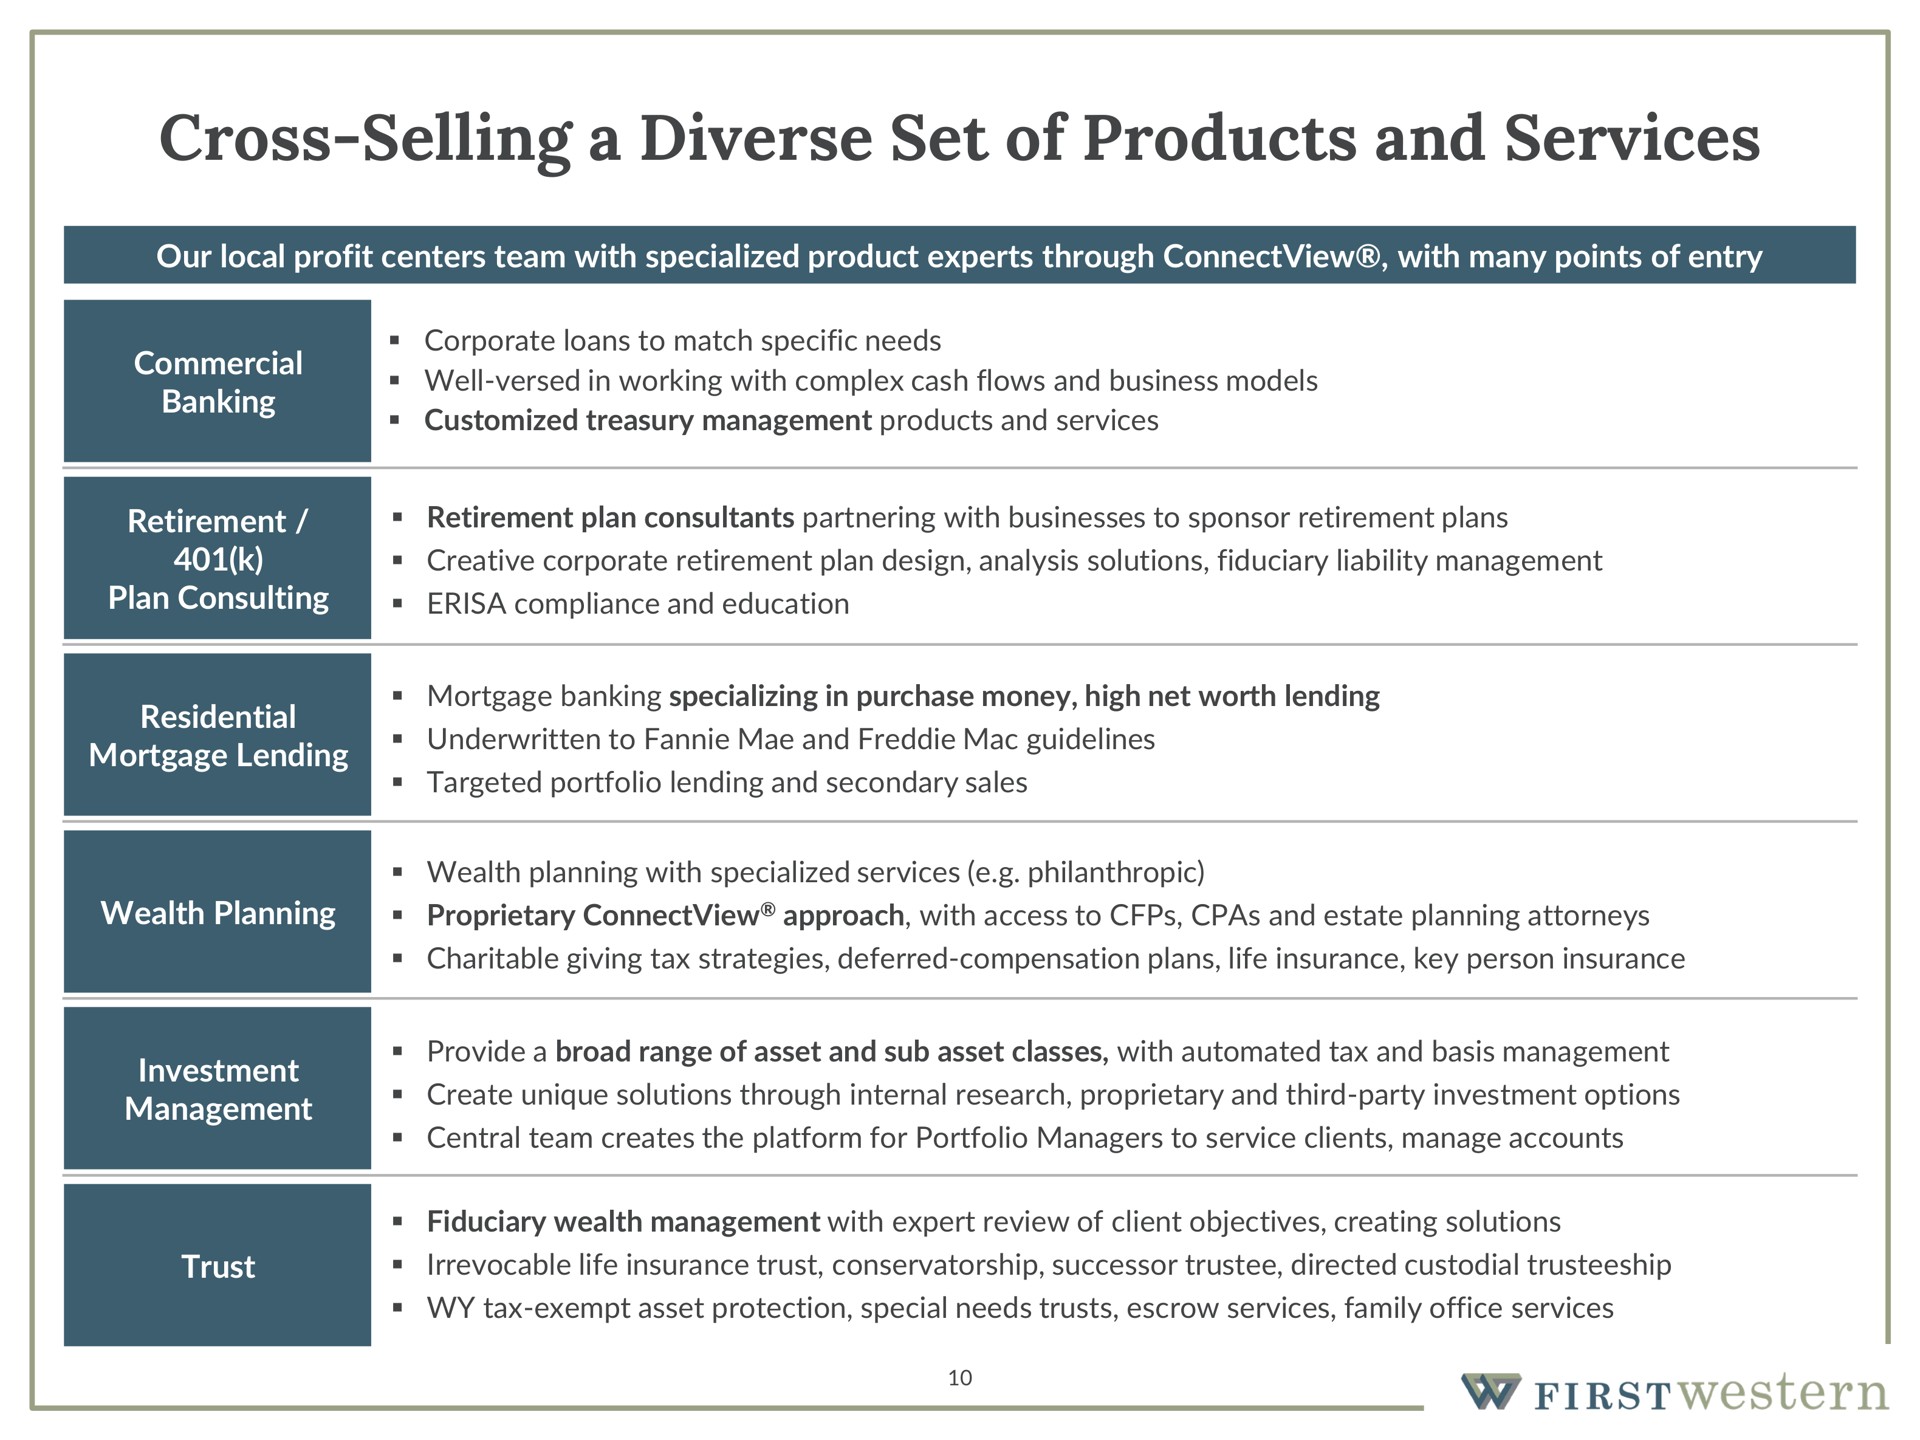 cross selling a diverse set of products and services | First Western Financial